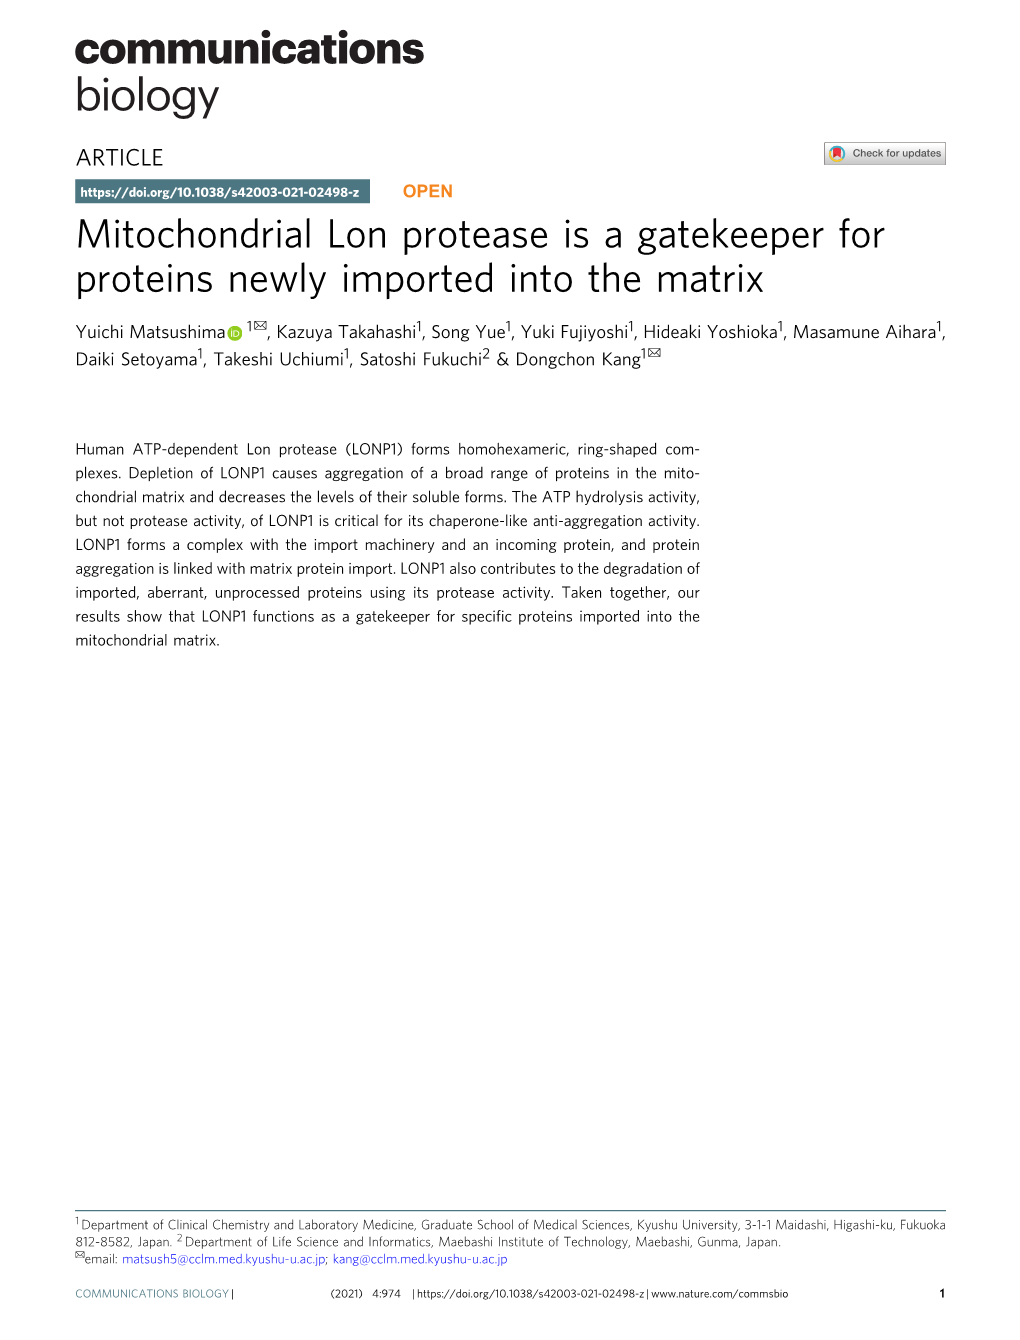 Mitochondrial Lon Protease Is a Gatekeeper for Proteins Newly